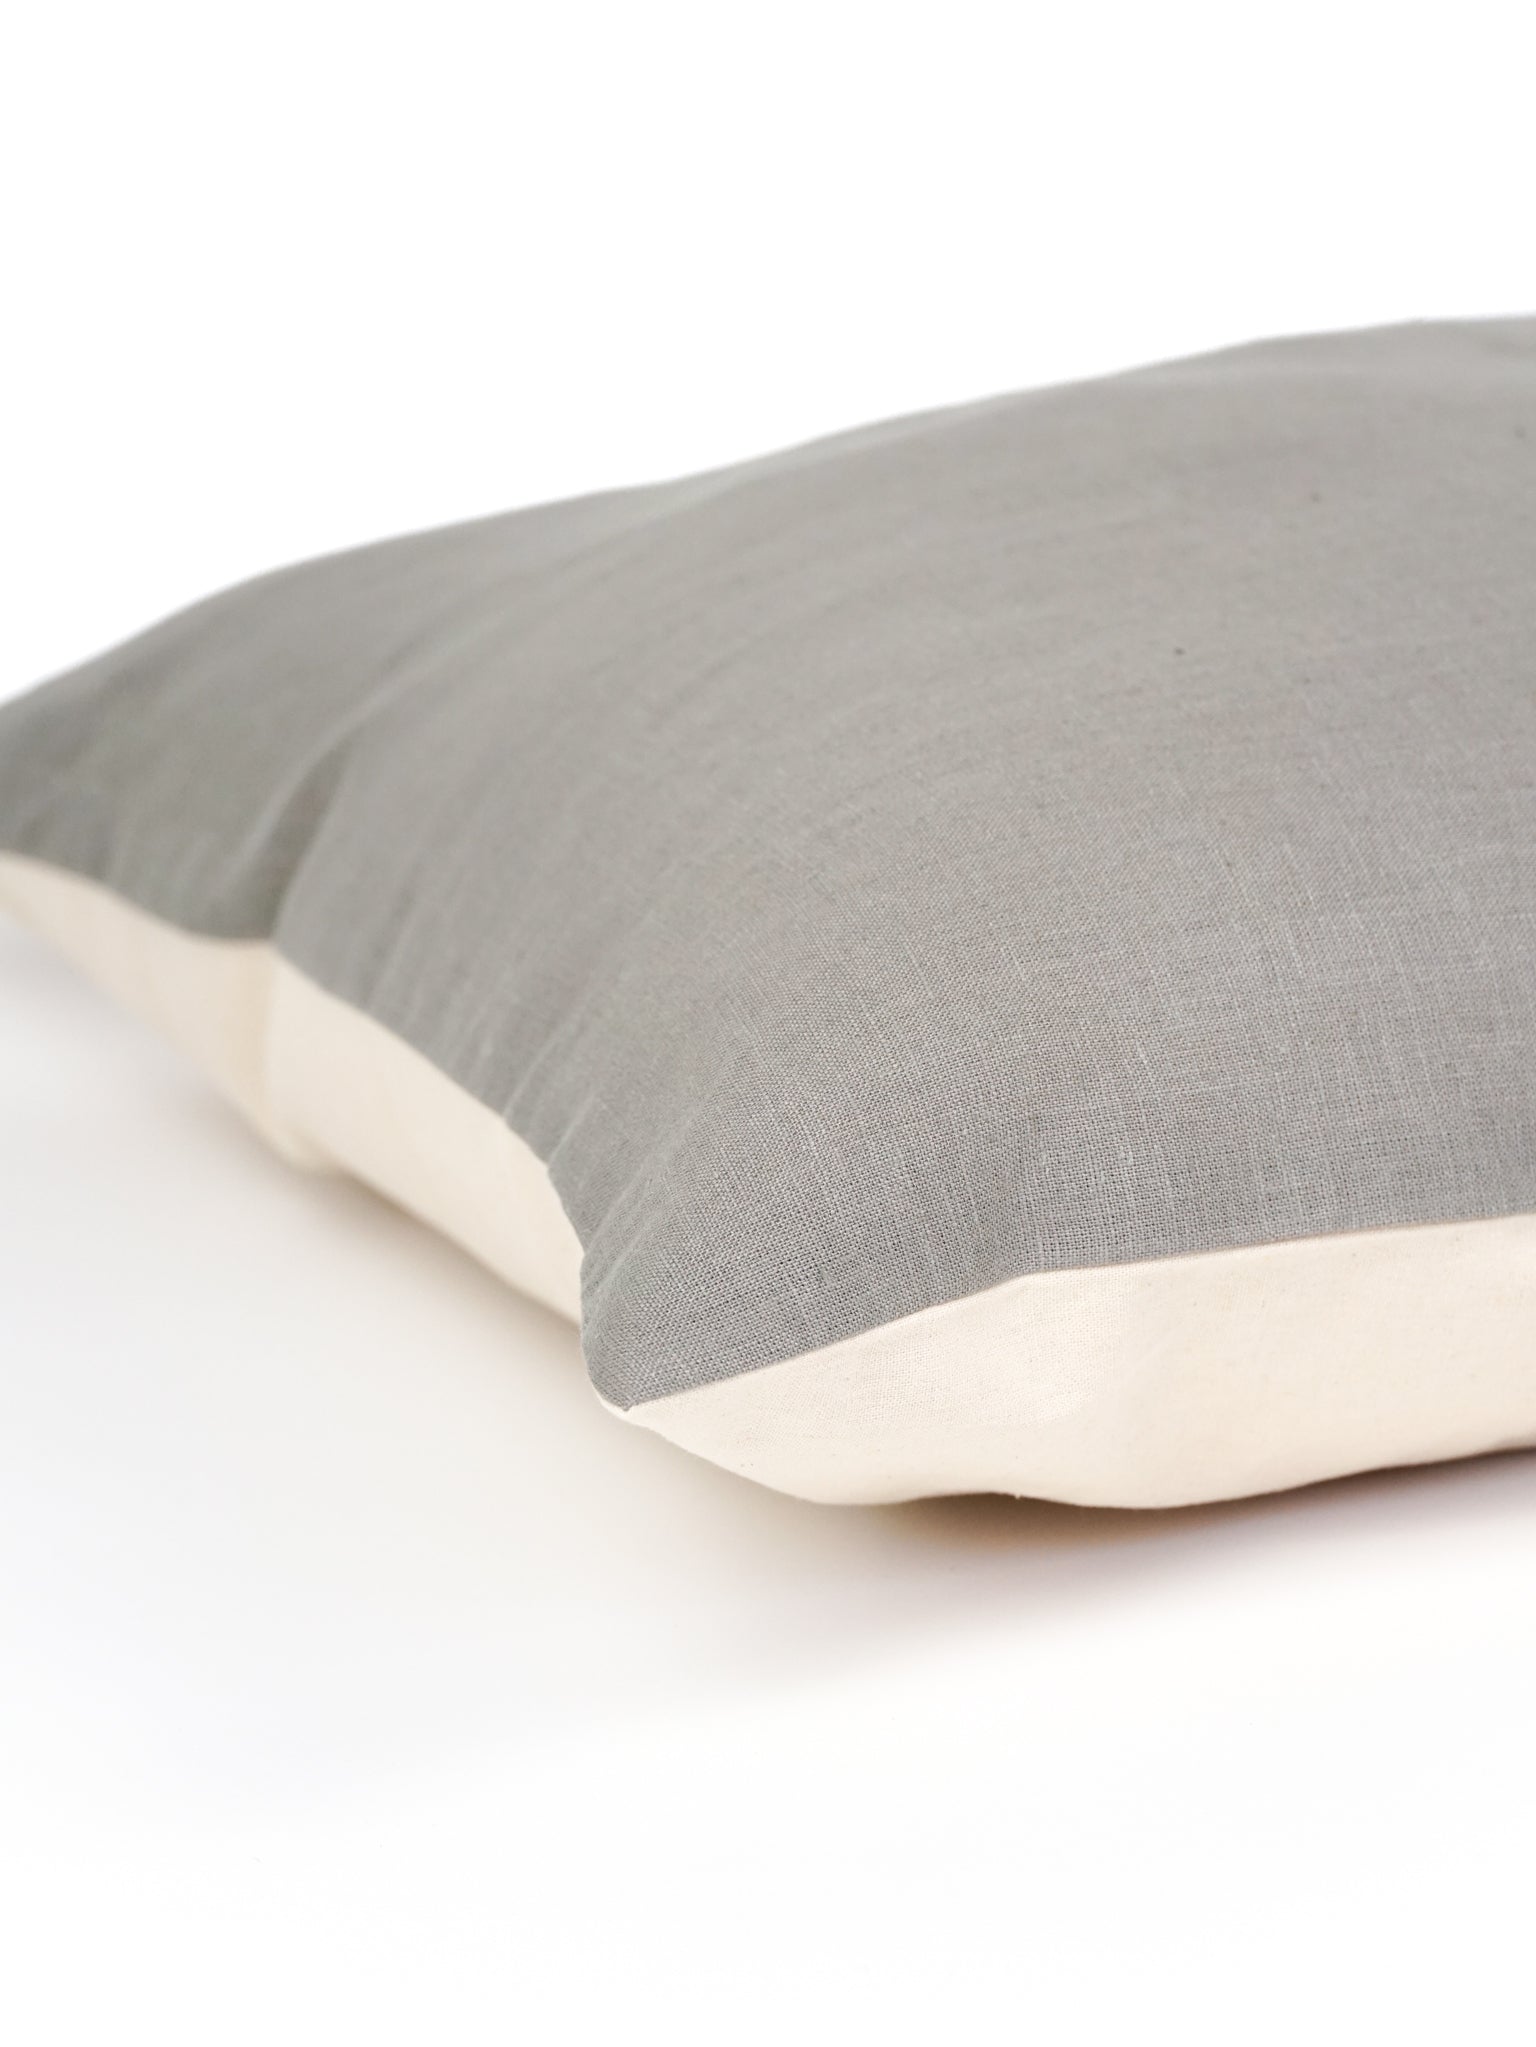 The Everyday Dog Bed in Sage Grey 